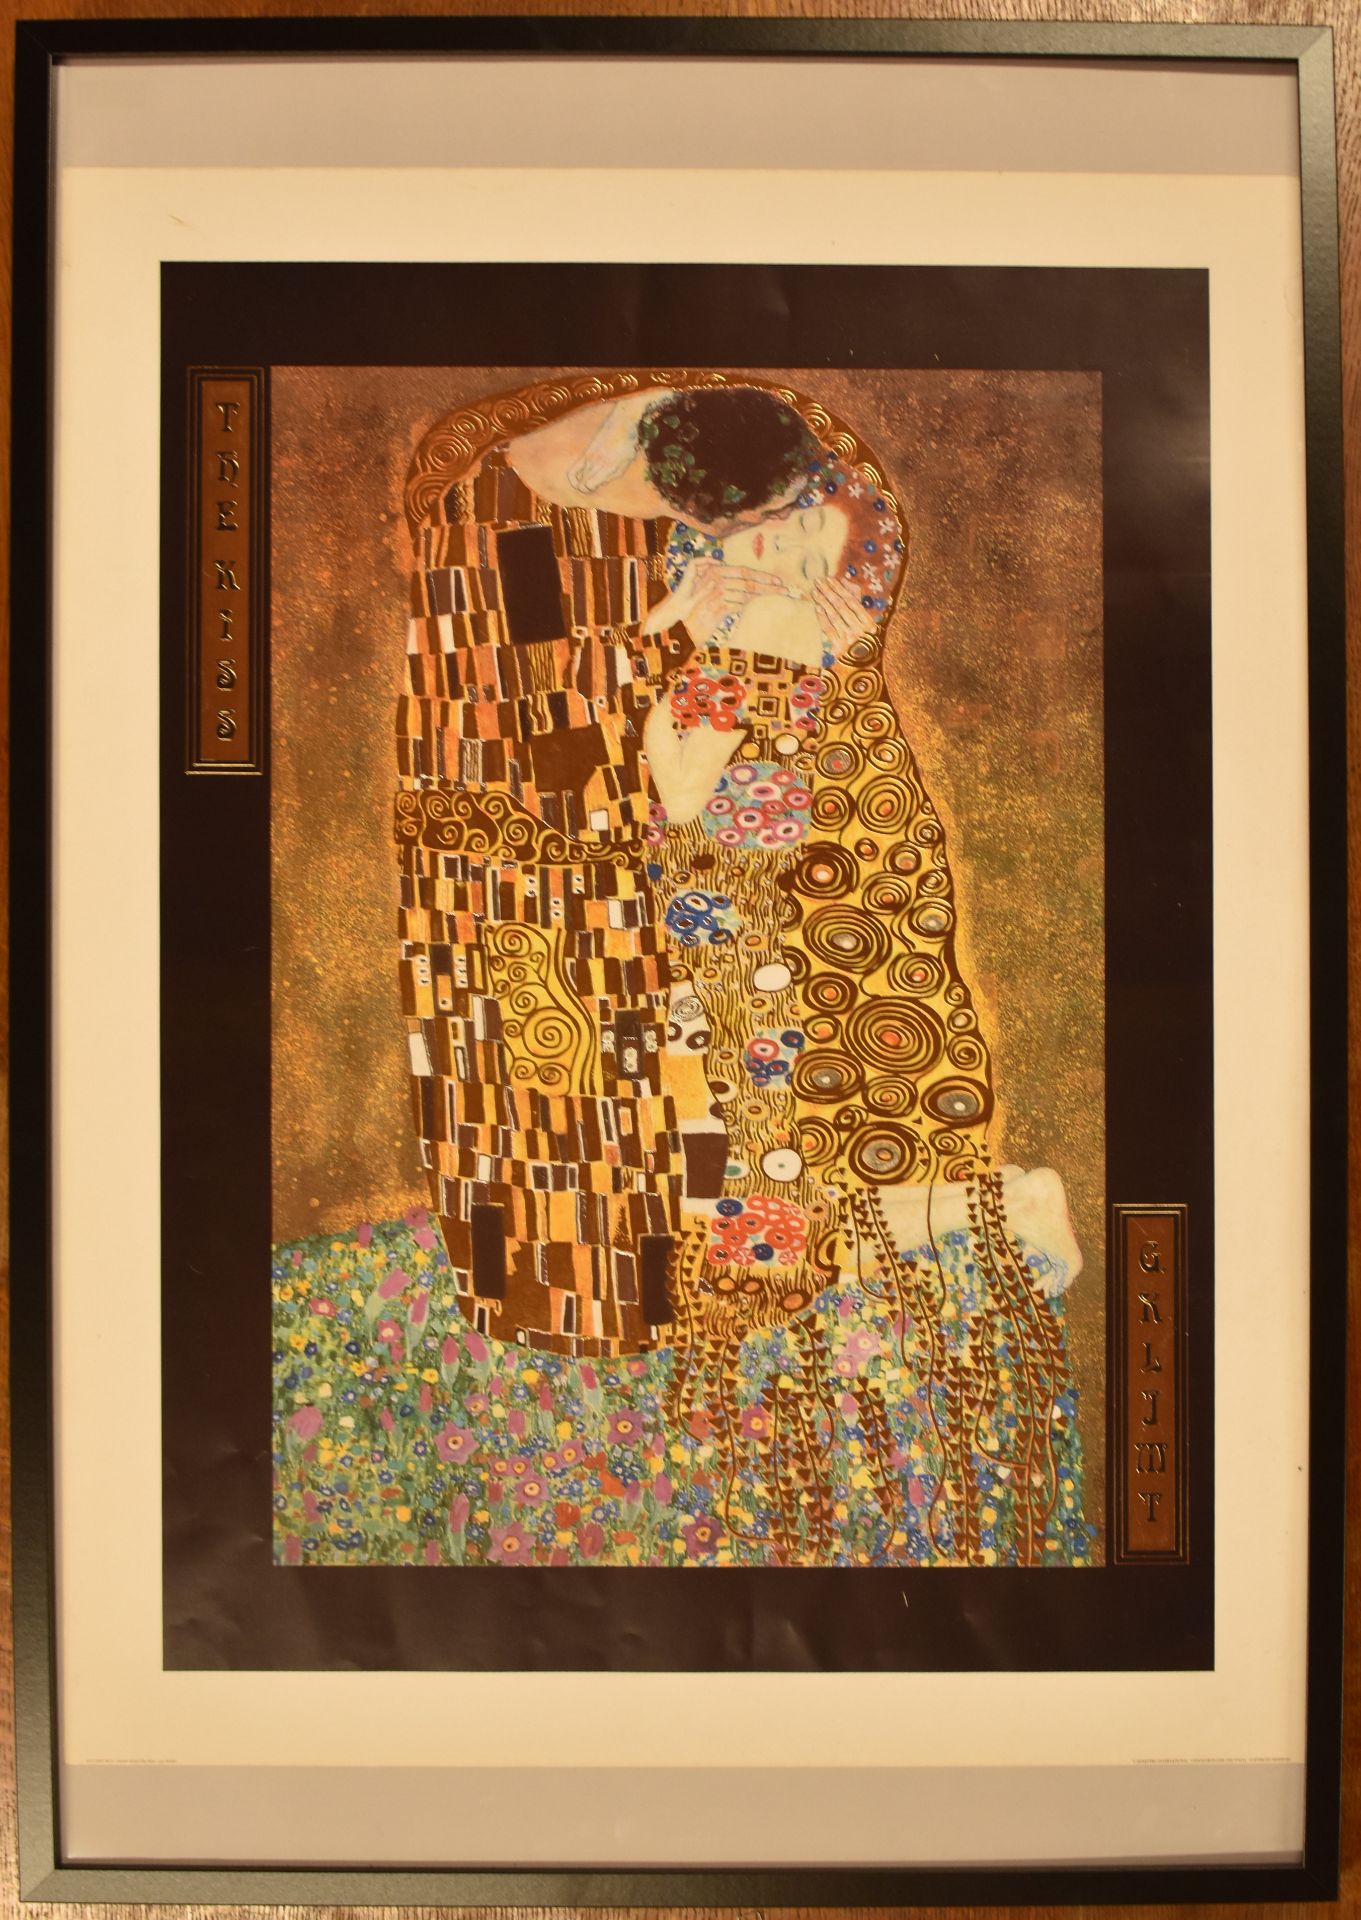 GUSTAV KLIMT - THE KISS - LITHOGRAPH ON PAPER - Image 2 of 5